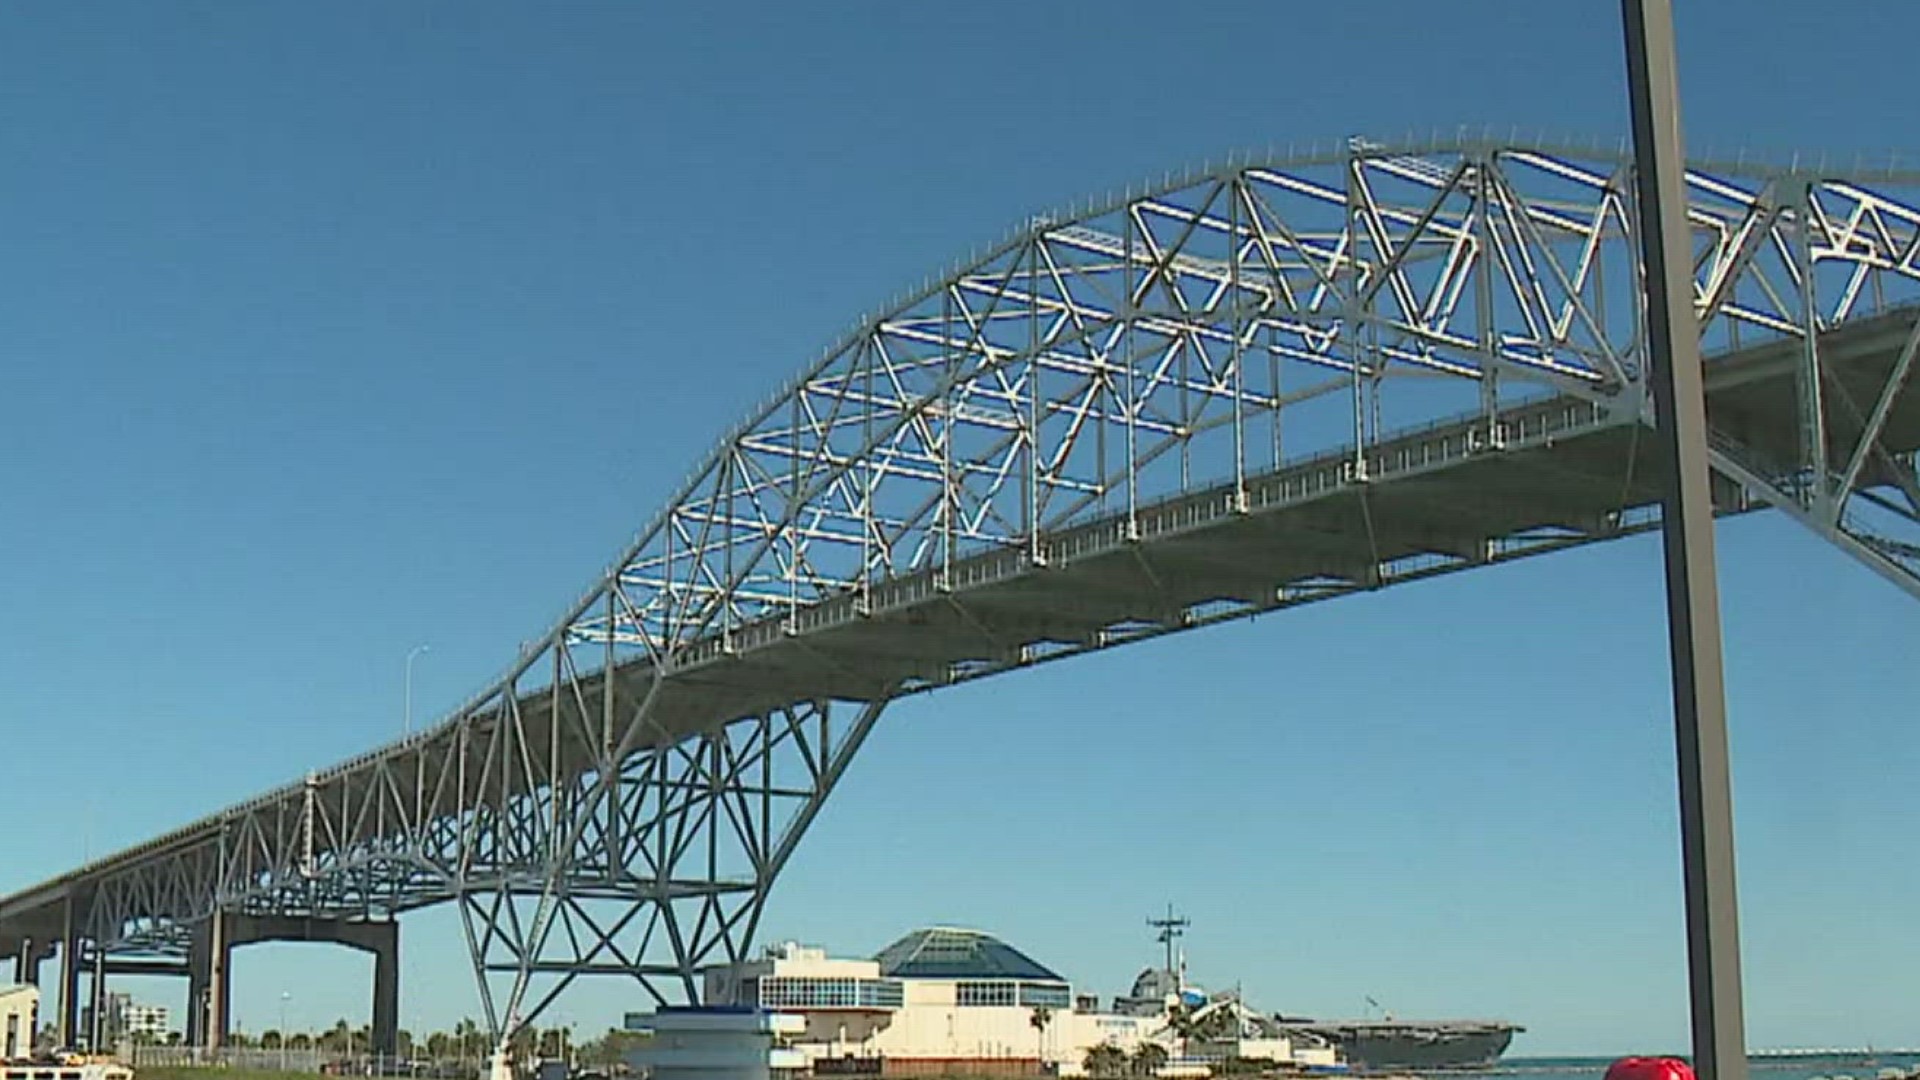 We spoke with the Harbor Bridge Project to learn about what people in the Coastal Bend can expect out of the project as we begin the new year.